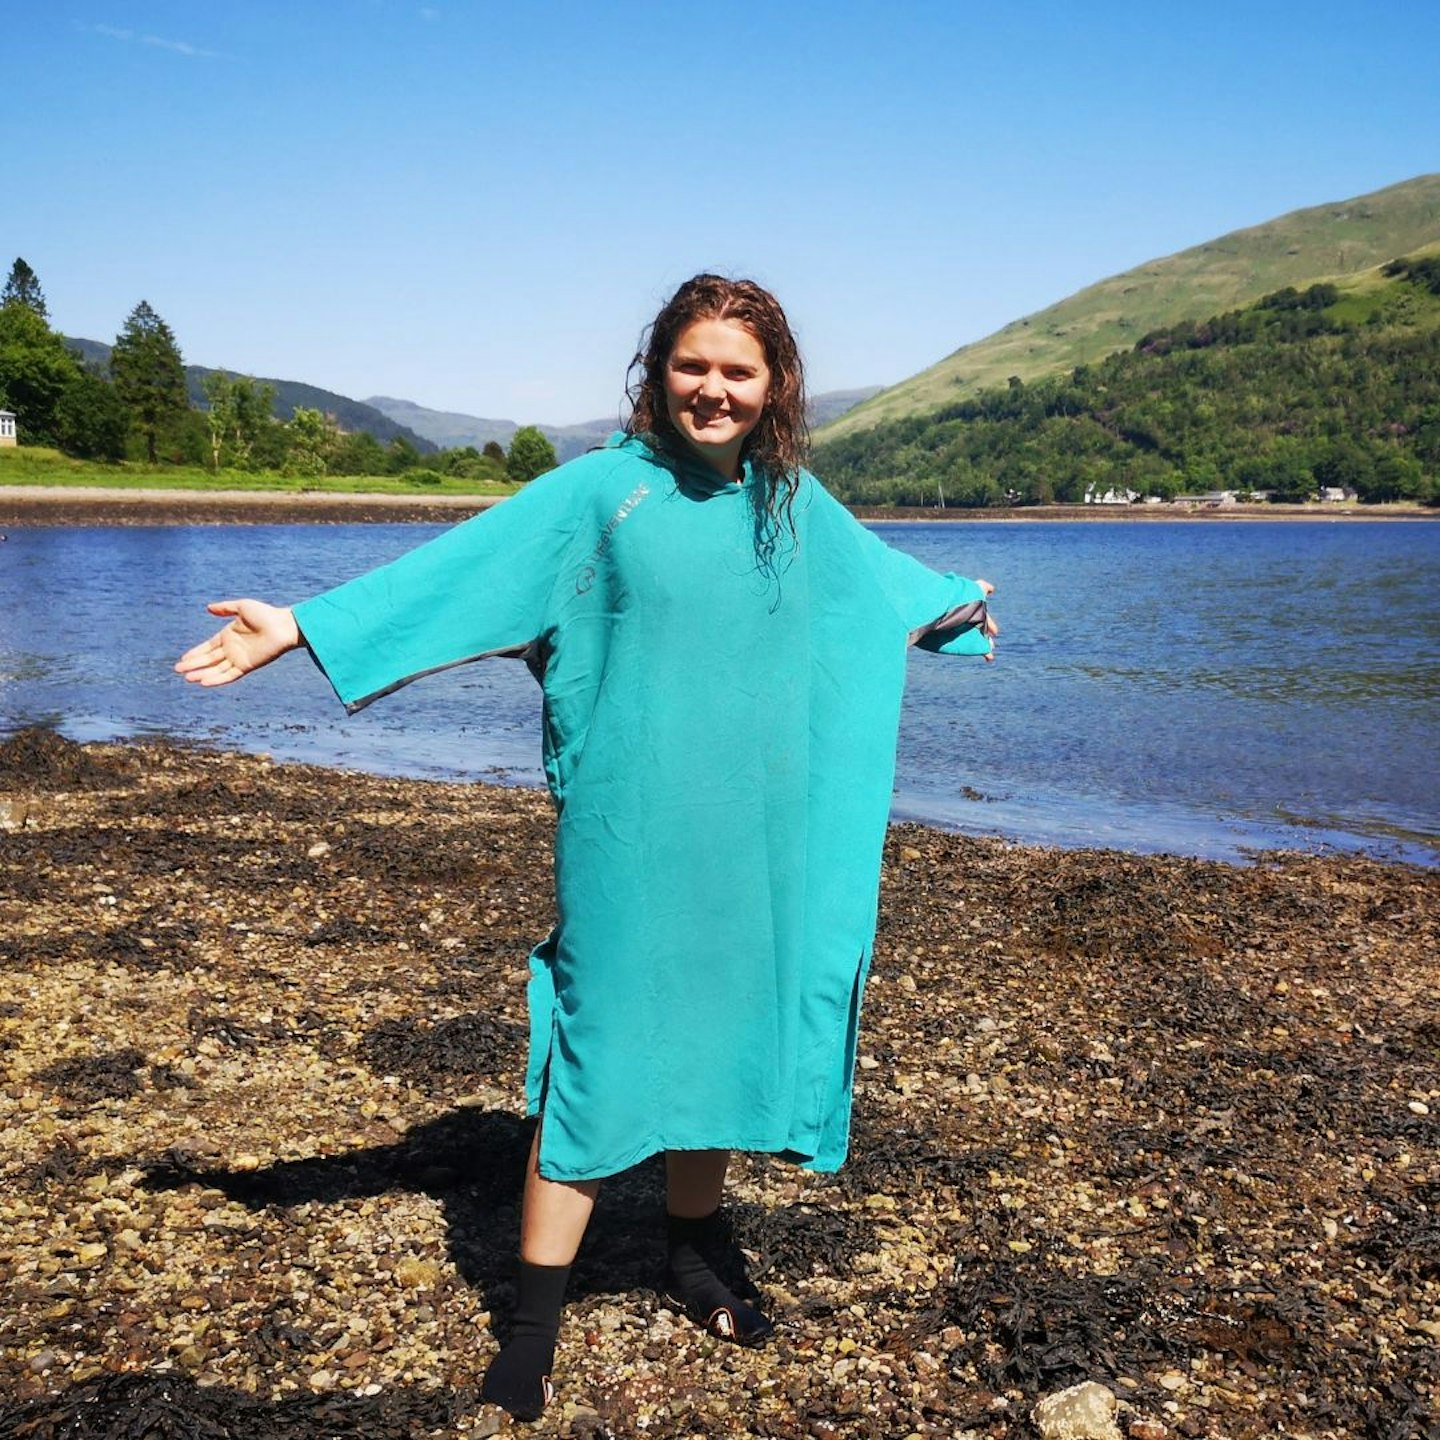 Fliss Wears the lifeventure changing robe